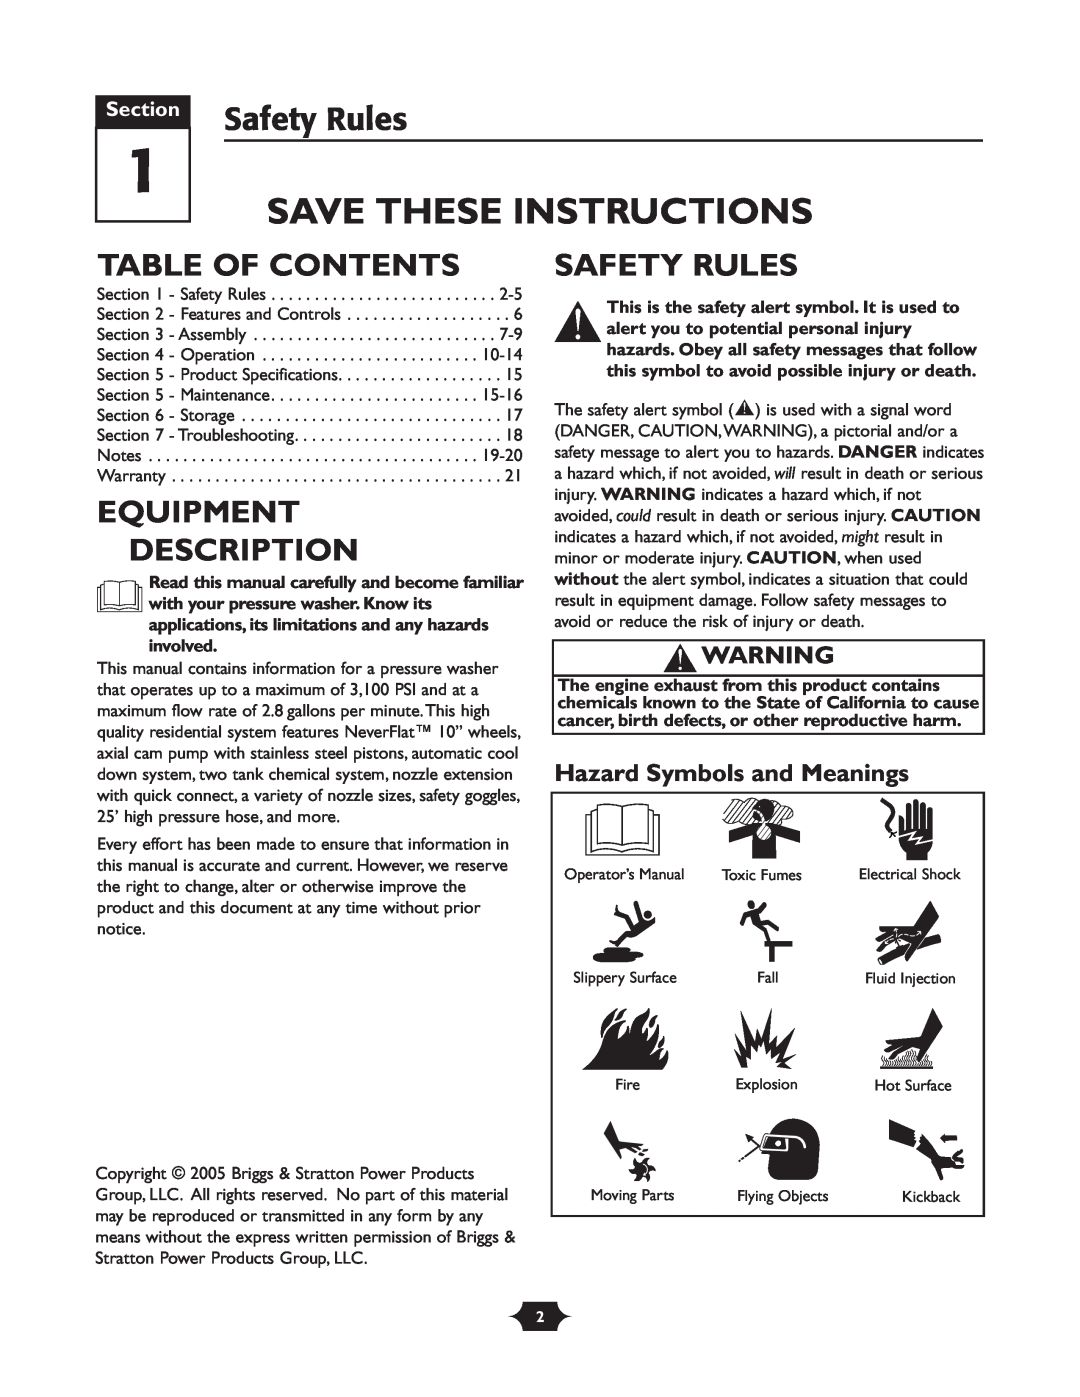 Briggs & Stratton 20263 manual Safety Rules, Table Of Contents, Equipment Description, Hazard Symbols and Meanings, Section 